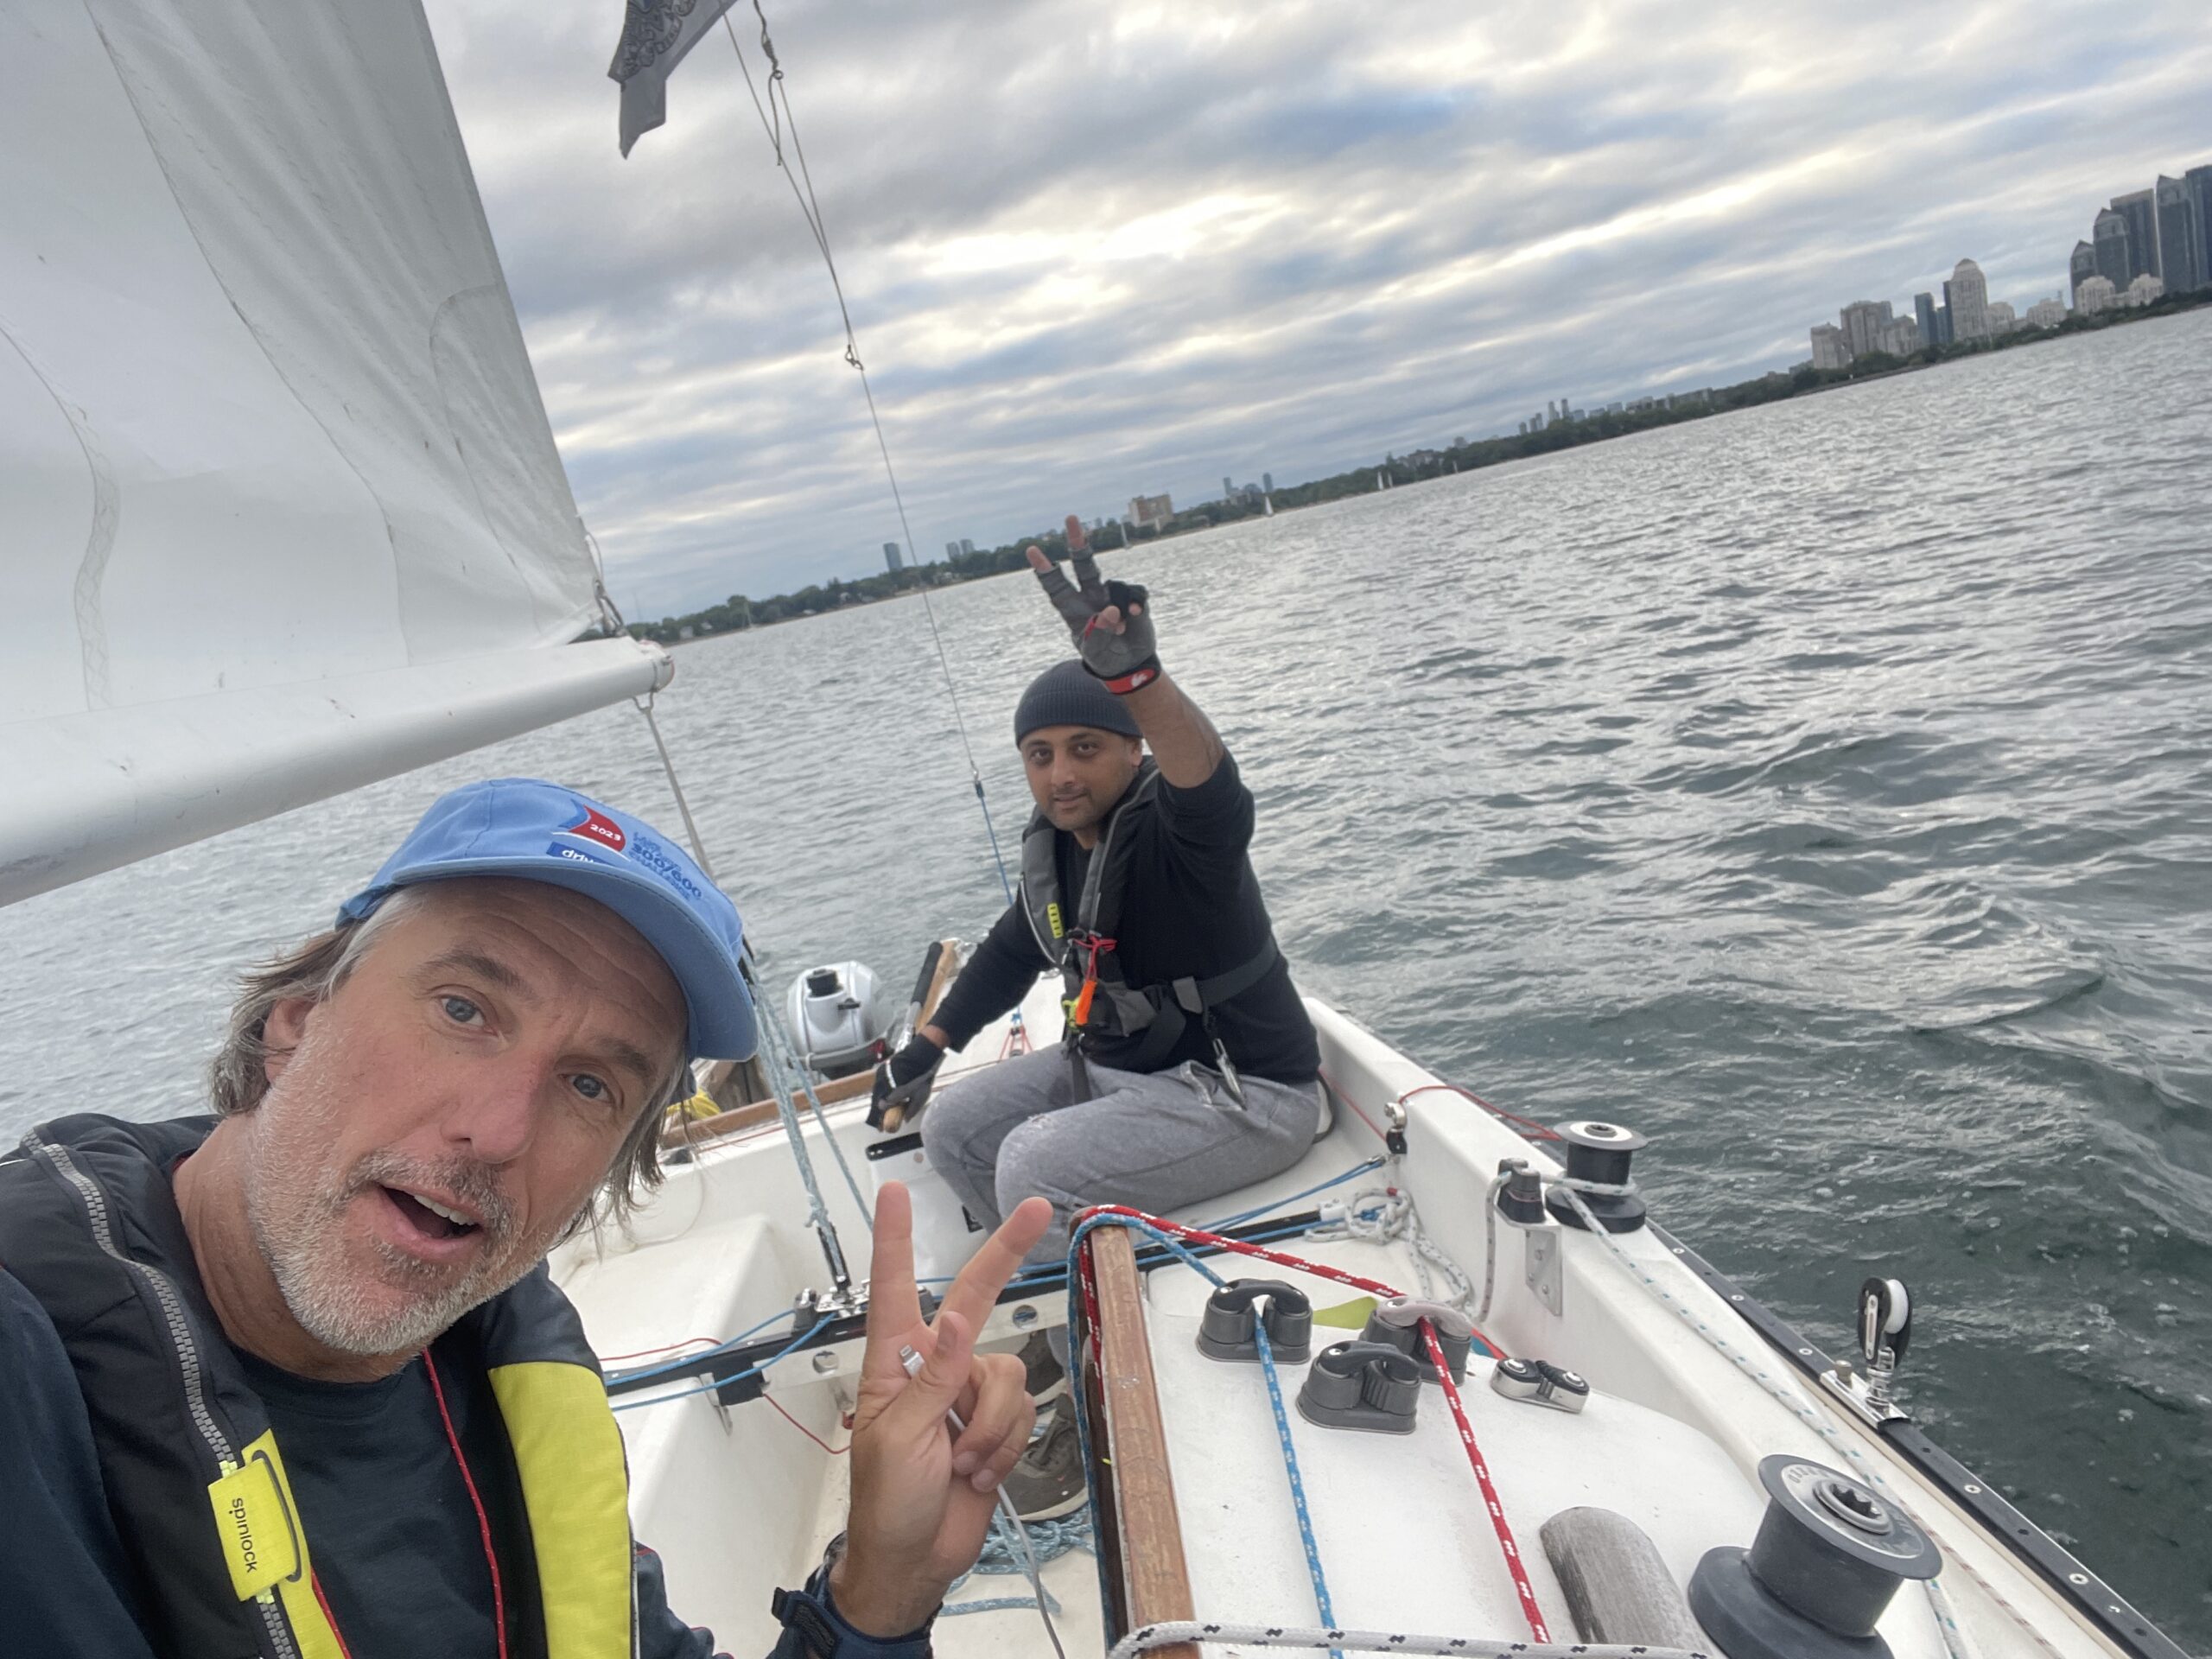 TWIS – Spi Gybe Sheets – Wild Wednesday – Night Race – Fastnet Planning – What Kind Of Sailor Are You?